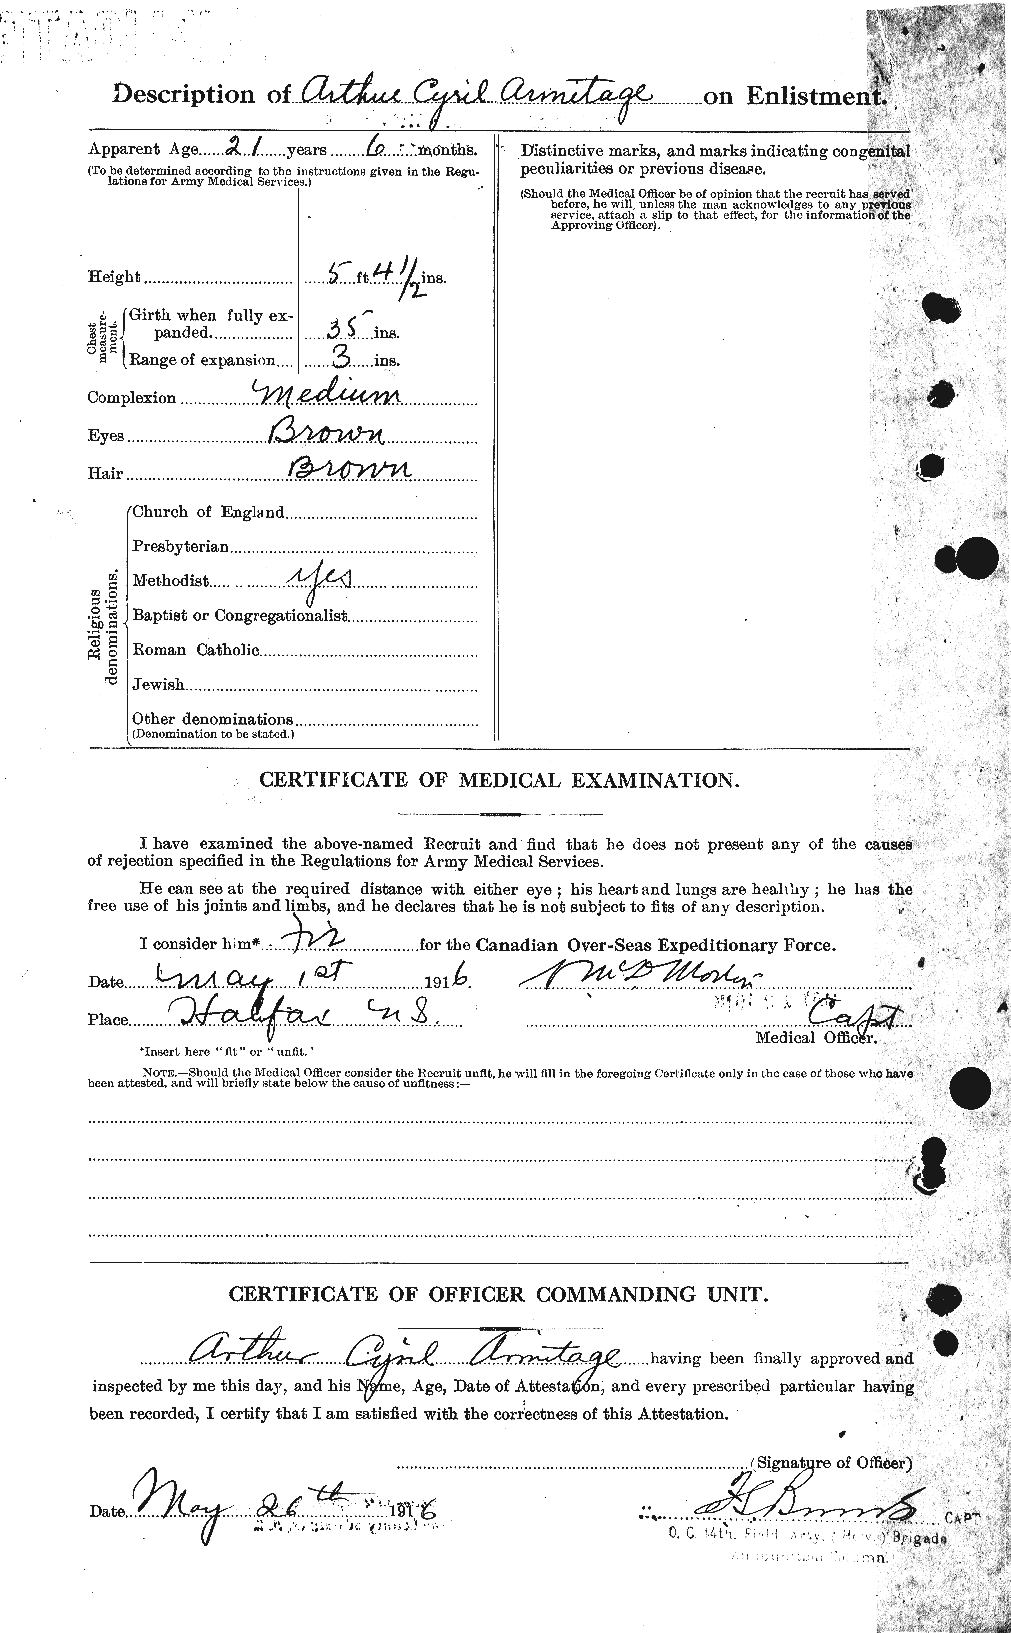 Personnel Records of the First World War - CEF 213439b